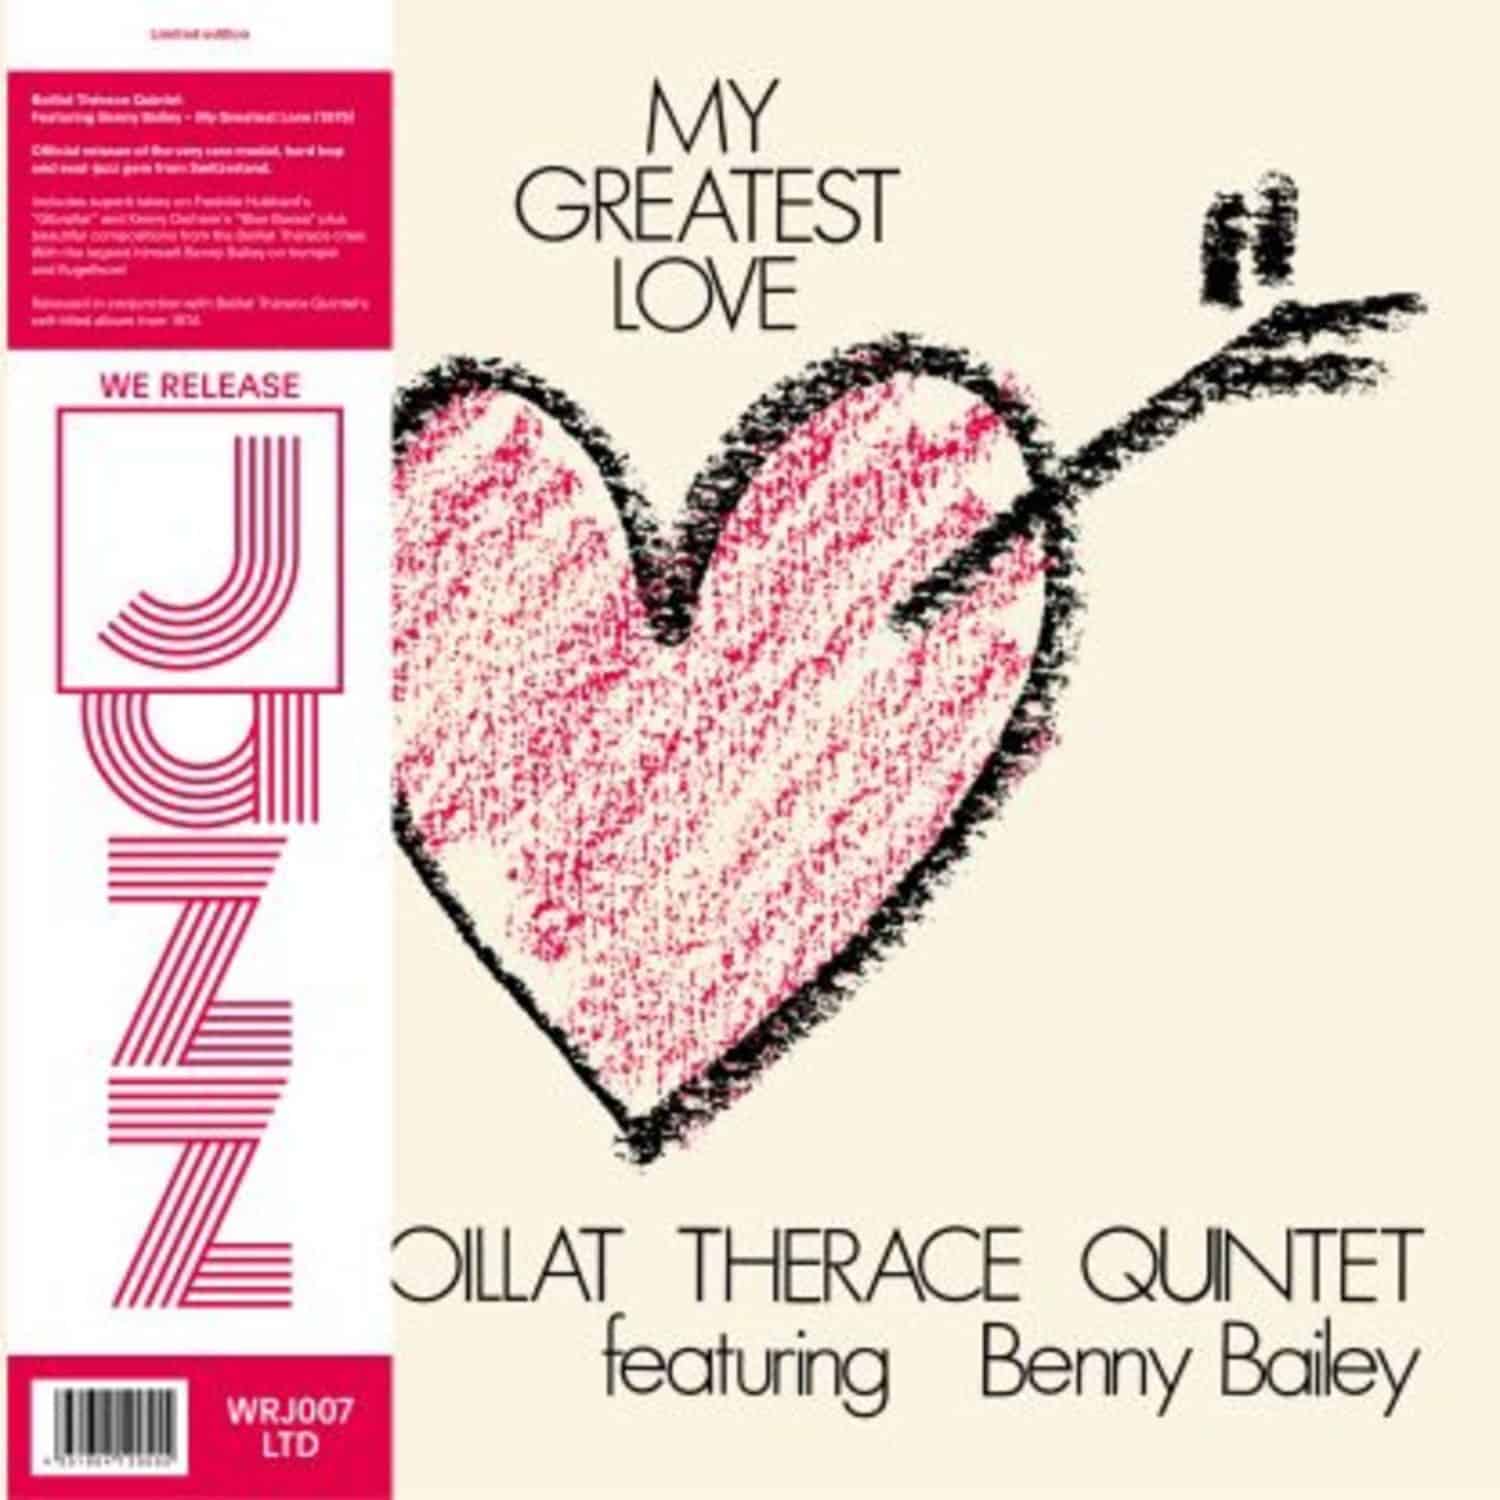 Boillat Therace Quintet featuring Benny - MY GREATEST LOVE 